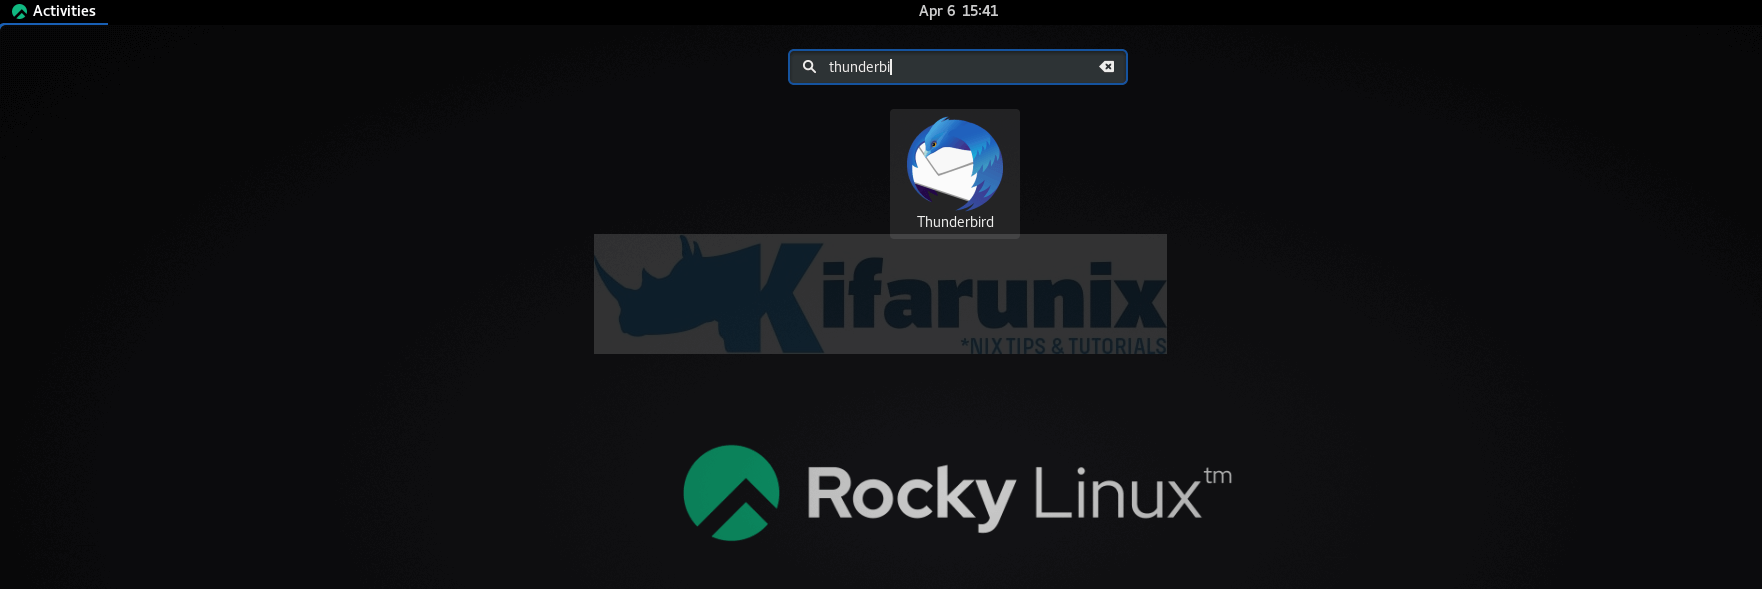 Install Thunderbird Mail Client on Rocky Linux